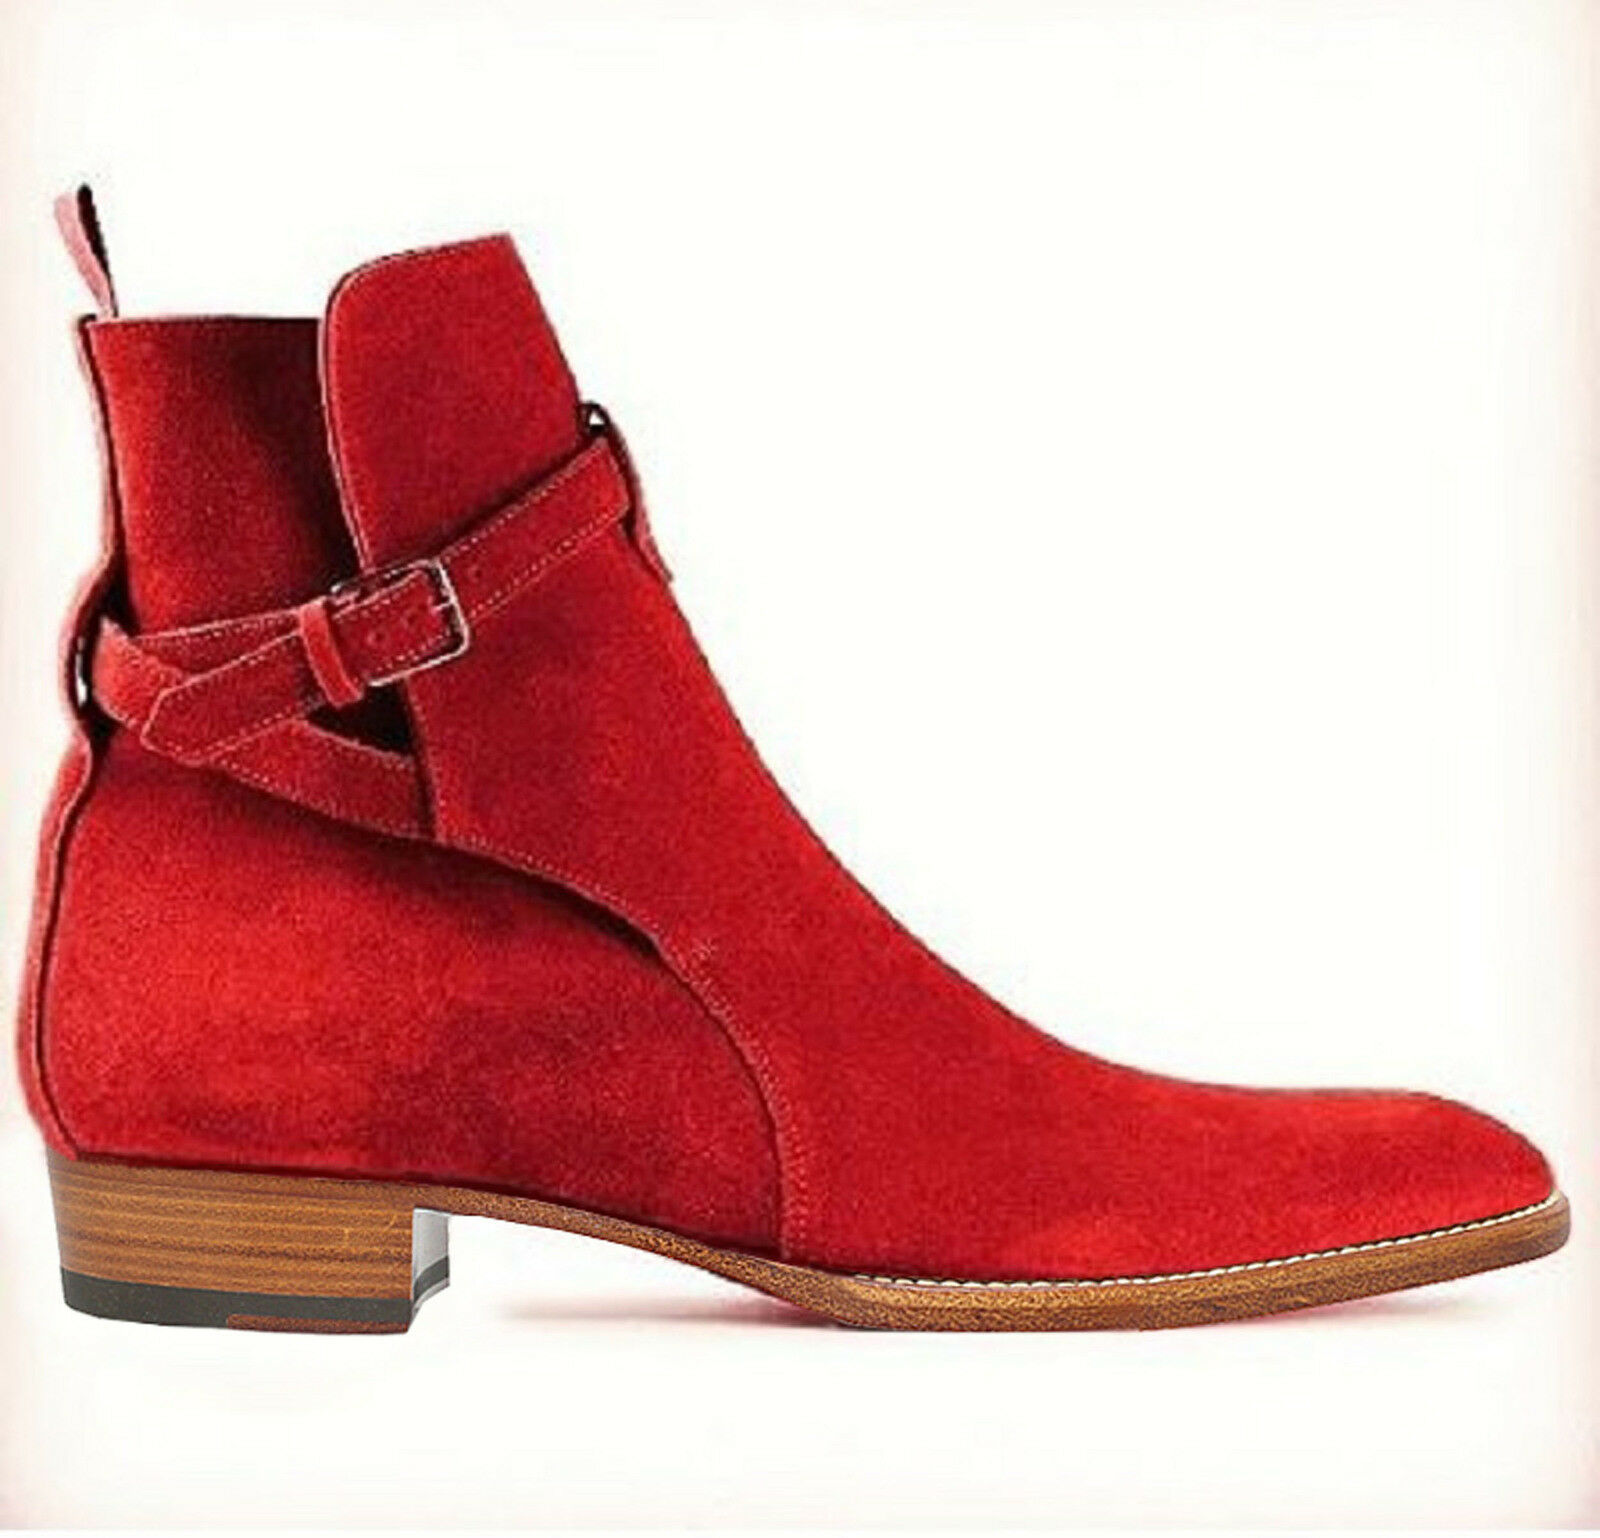 Men's Red High Ankle Jodhpur Rounded Buckle Strap Suede Leather Boots US 7-16